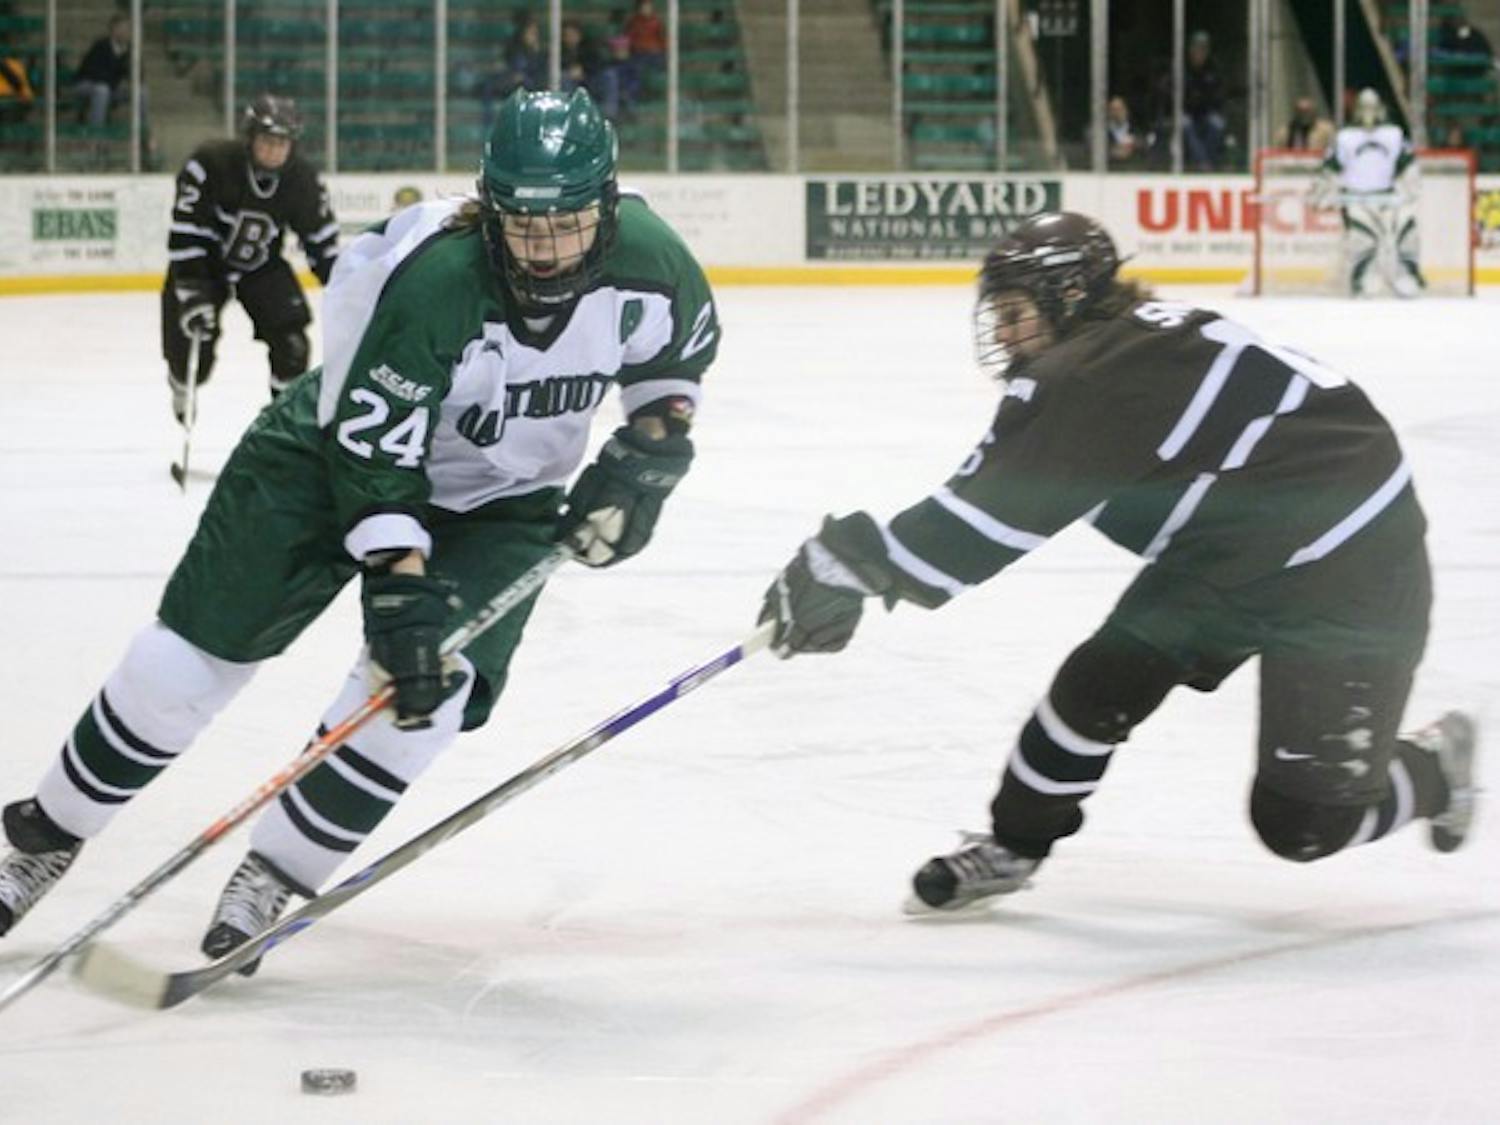 Captain Sarah Newnam '09 was one of four returning players to earn All-Ivy recognition last season for Dartmouth.